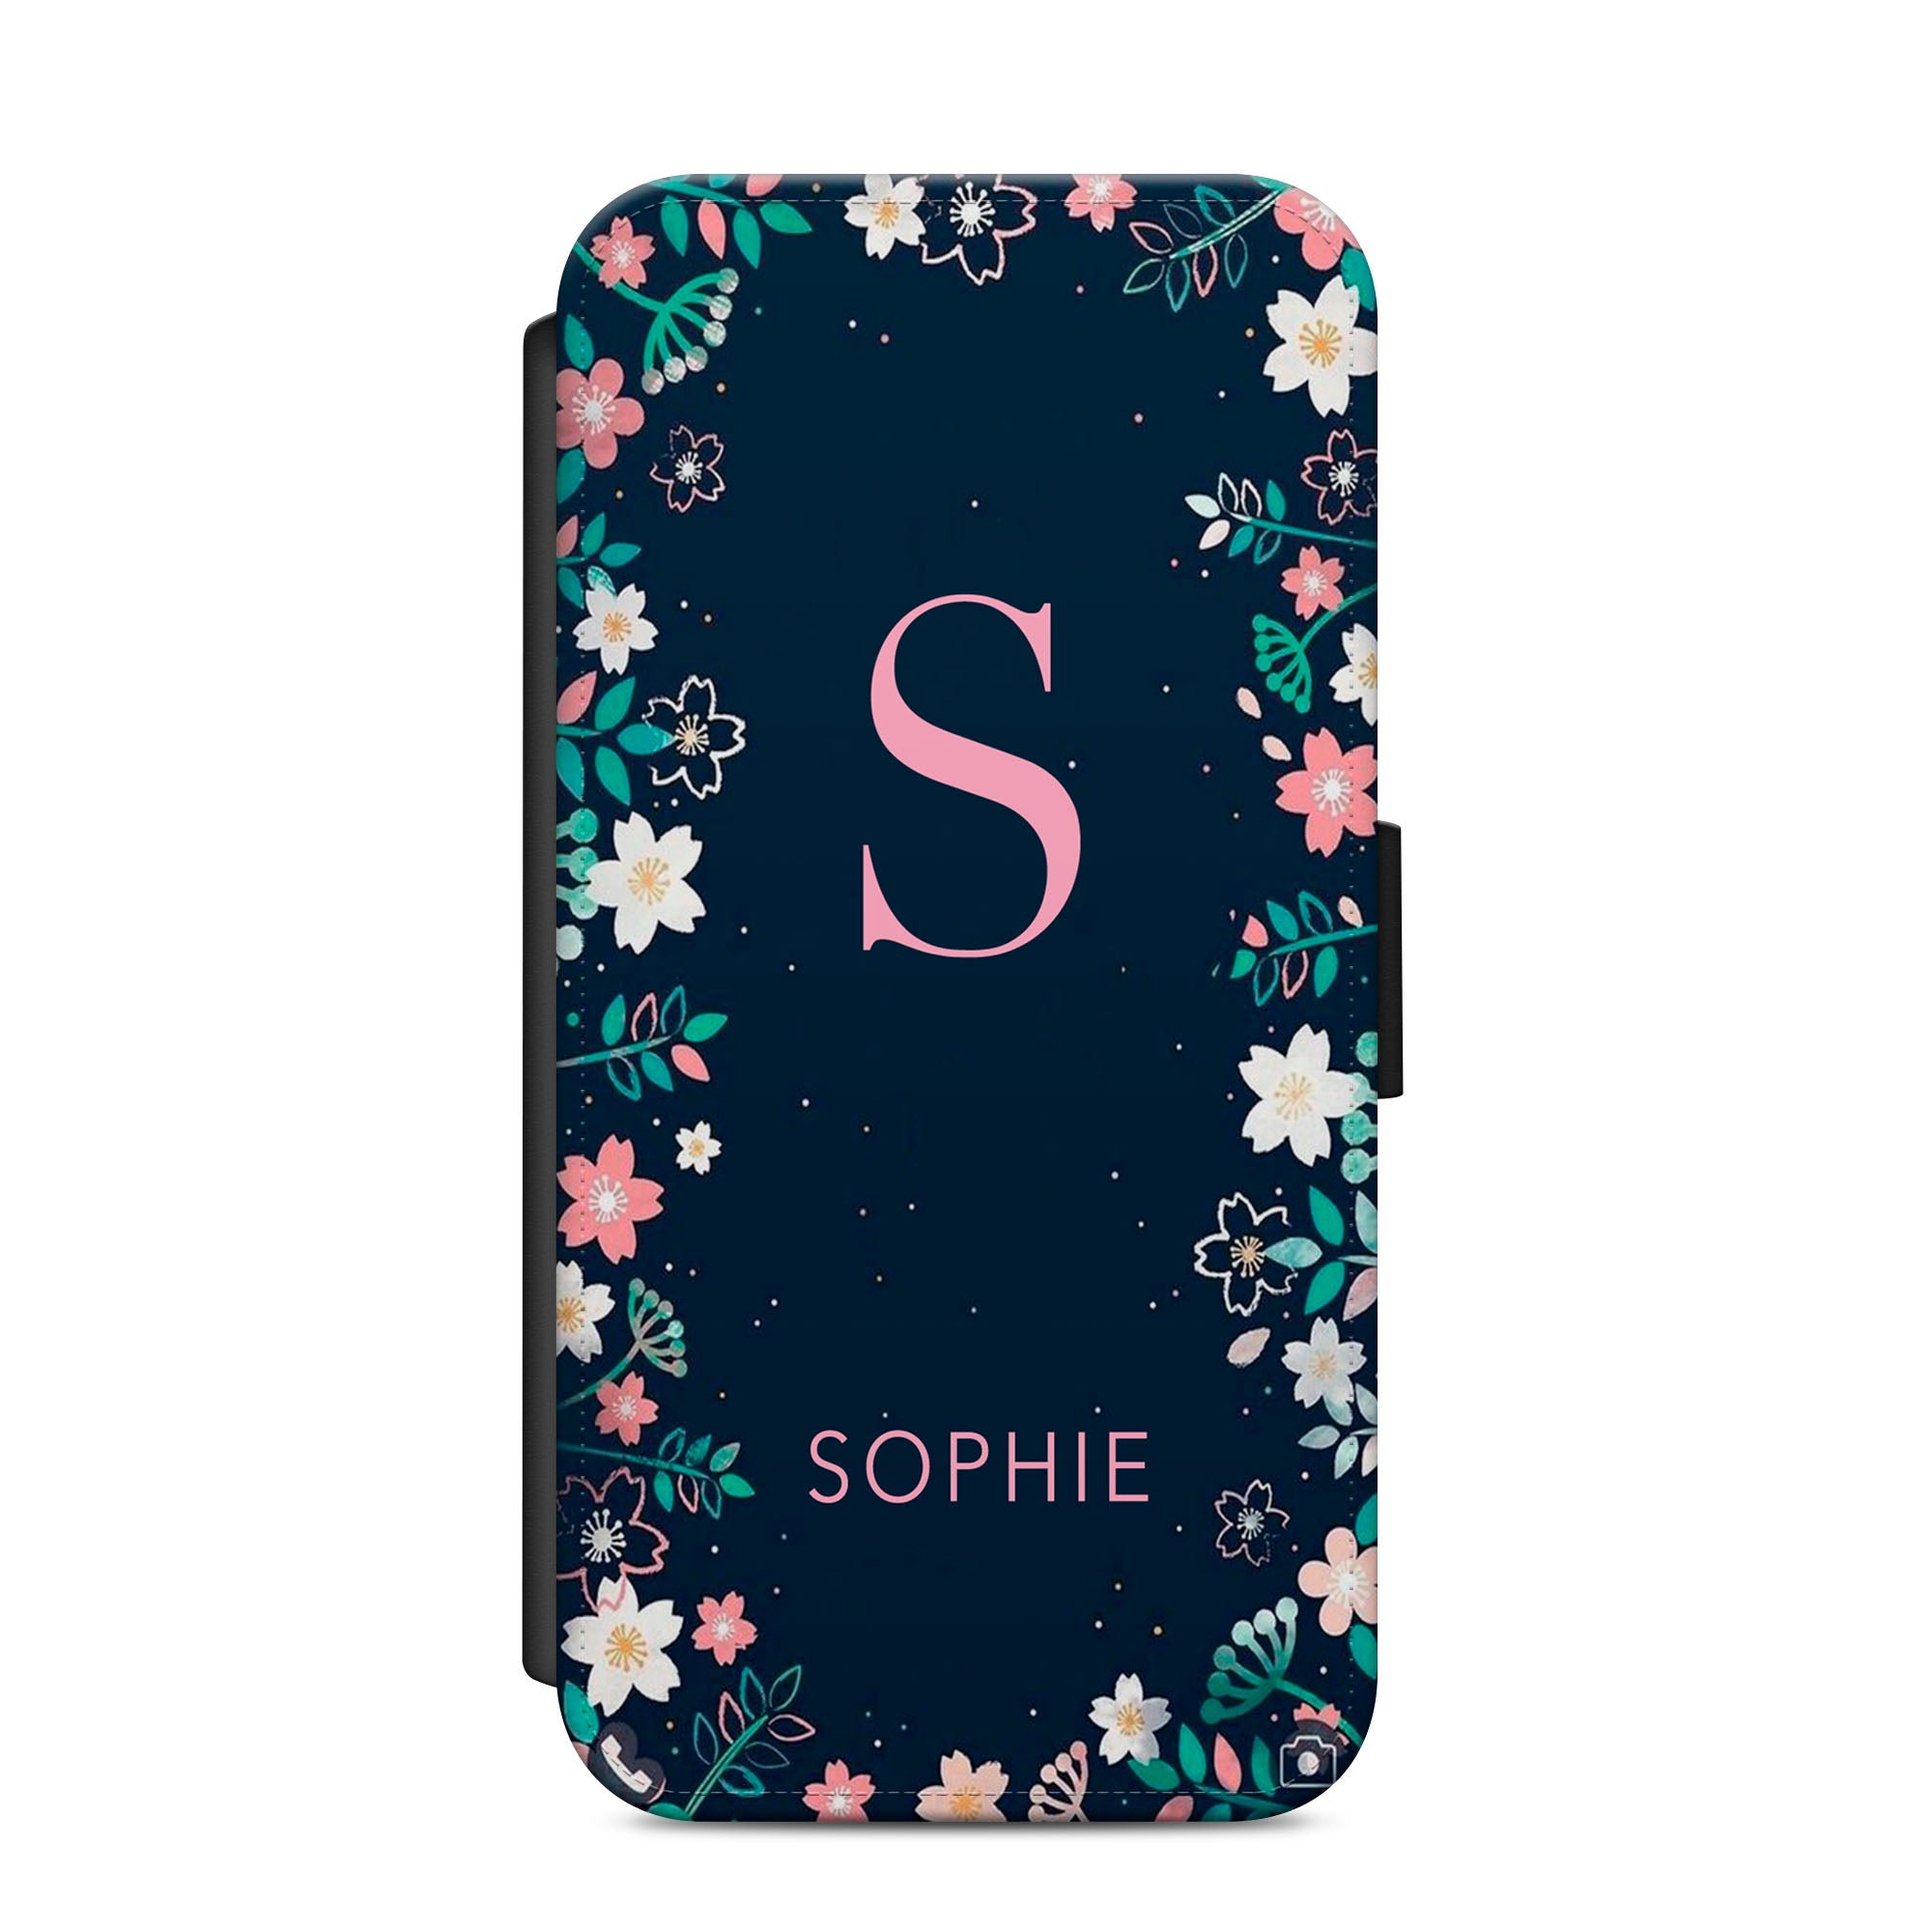 Personalised Floral Faux Leather Flip Case Wallet for iPhone / Samsung